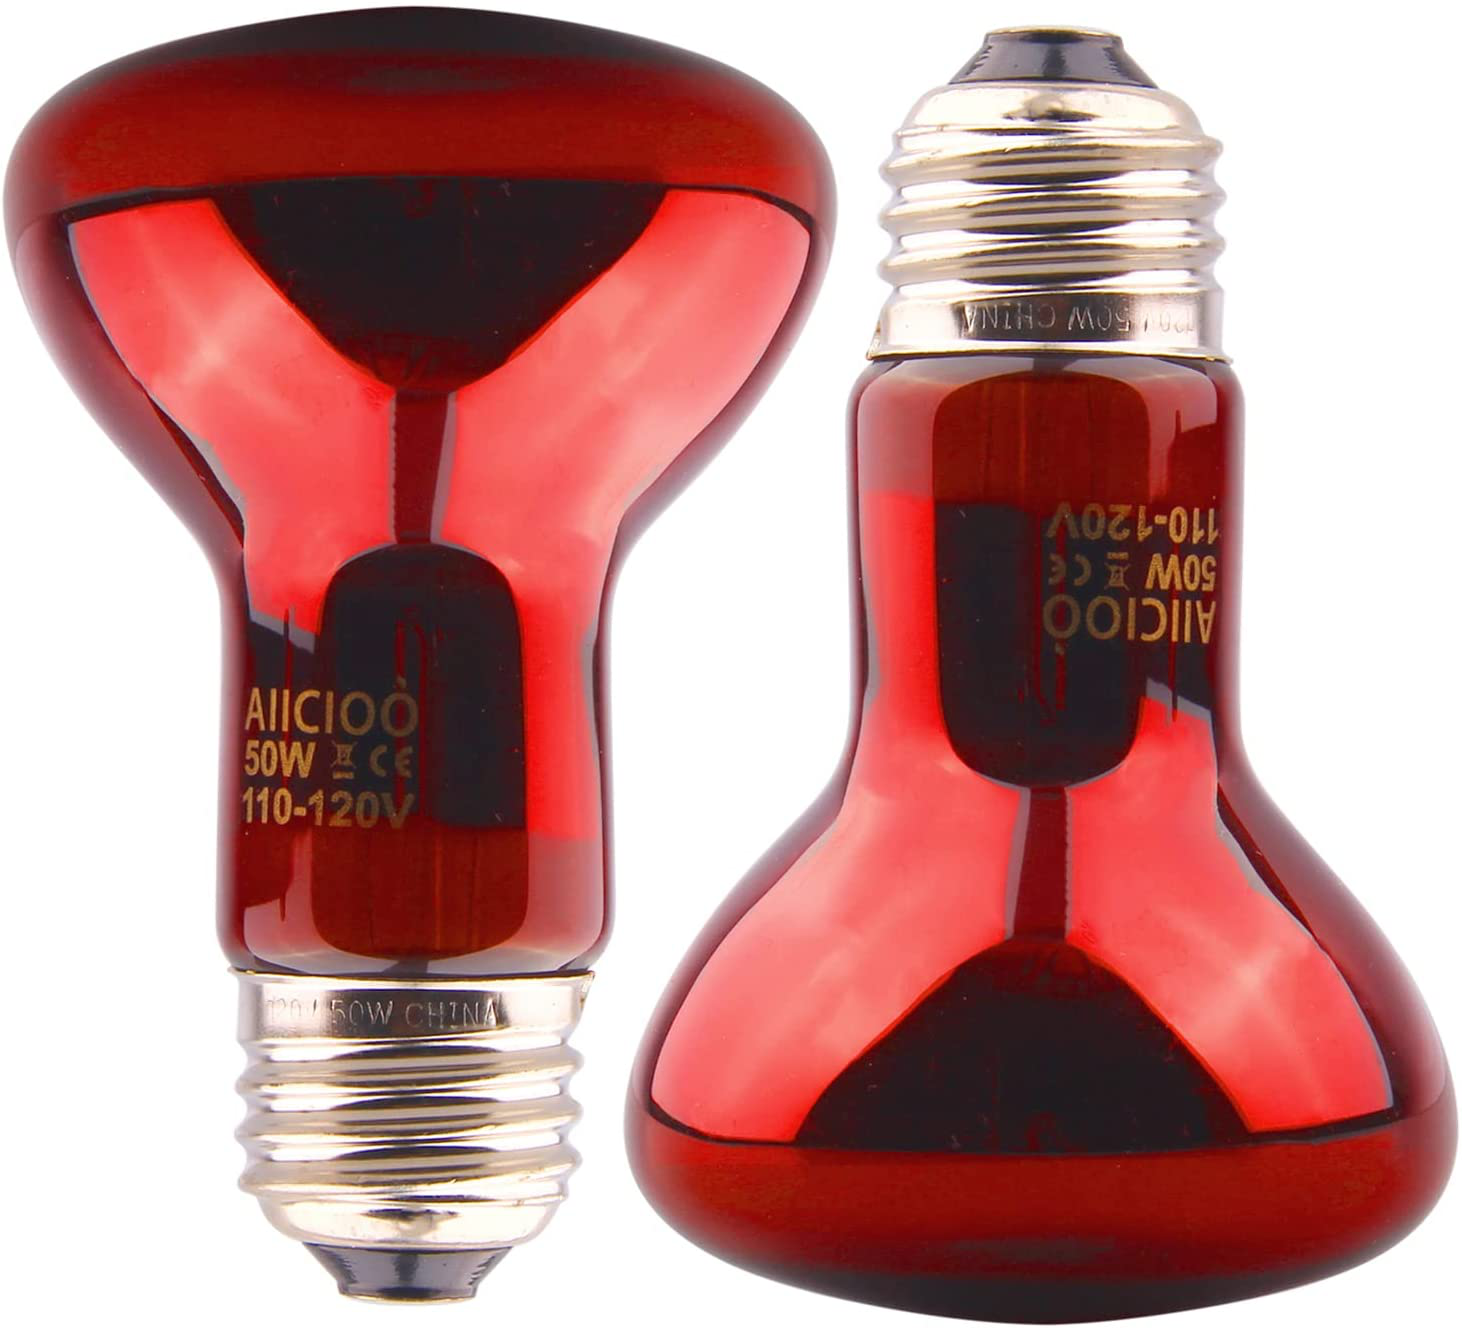 Reptile Red Light Bulbs - 100W Infrared Basking Spot Lamp Reptile Heat Lamp for Bearded Dragon Turtle Hermit Crab Leopard Gecko Tank 2Pack